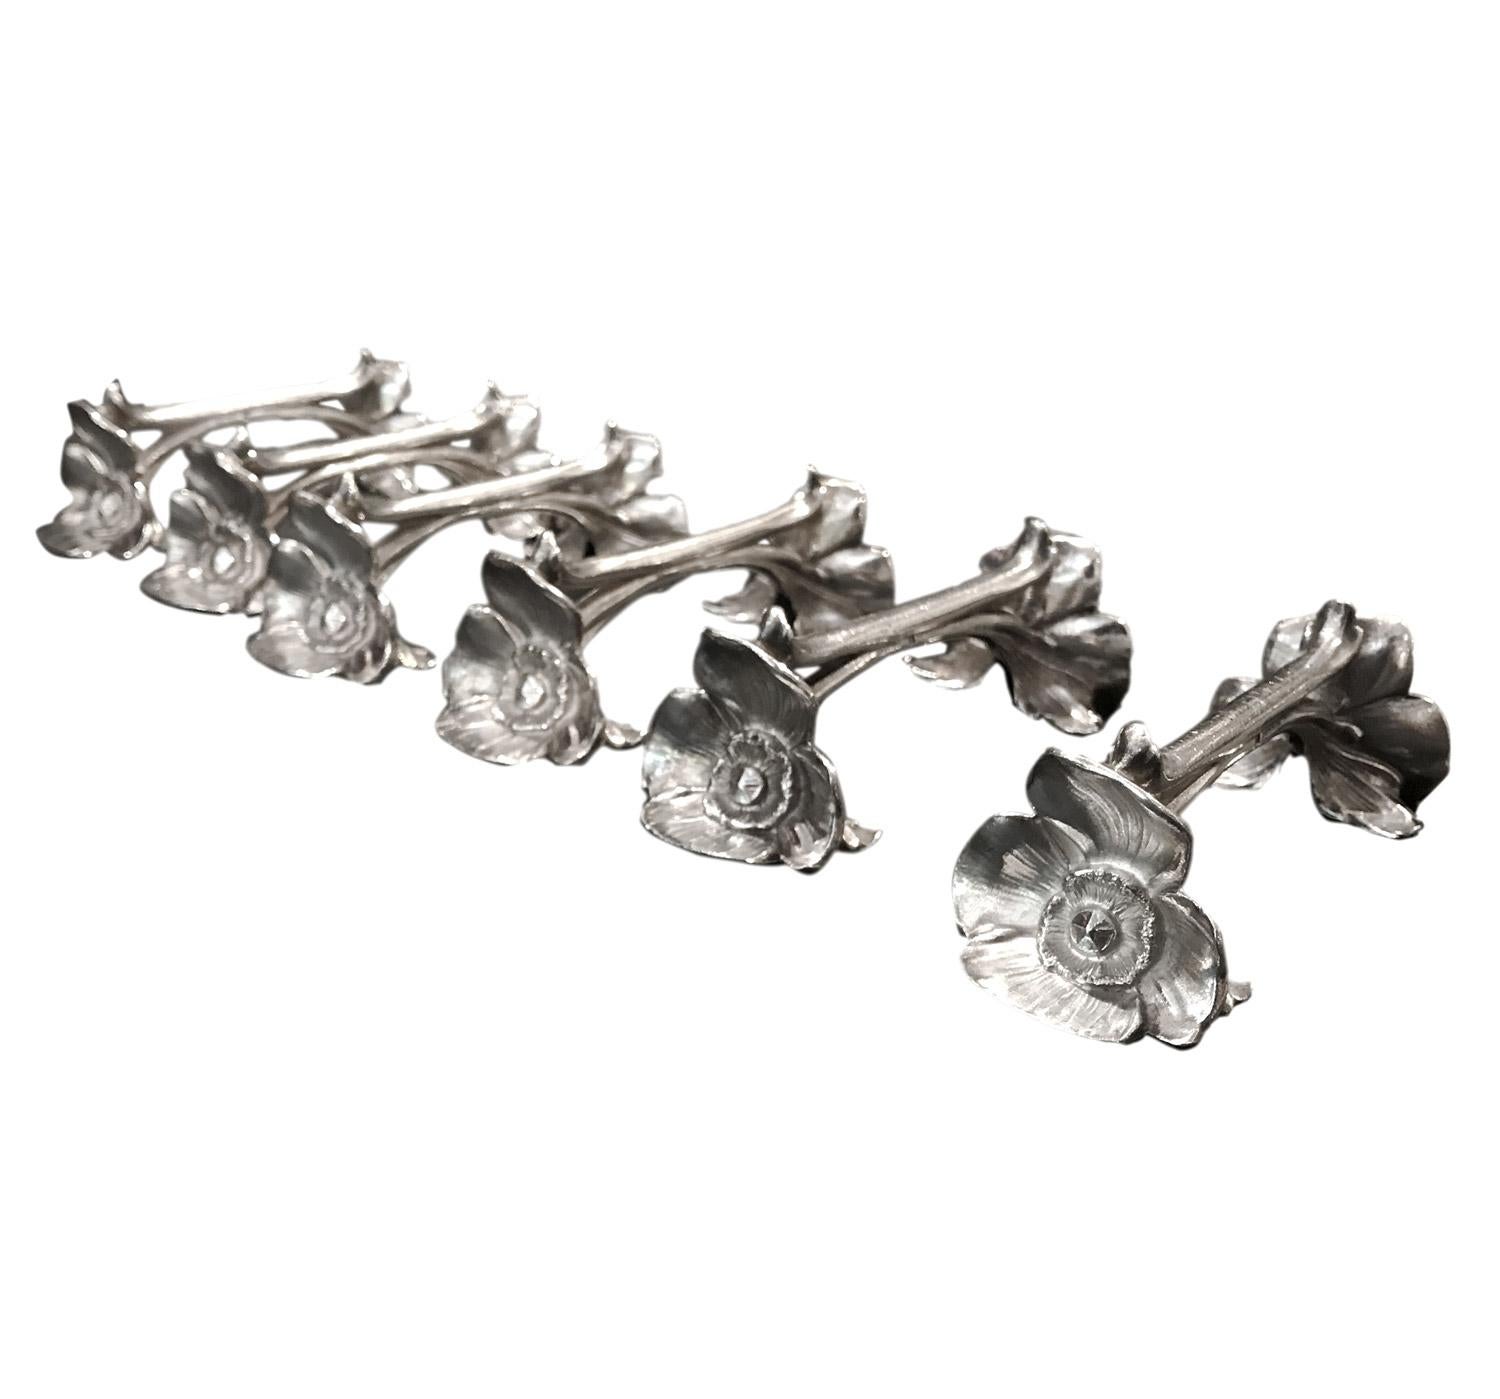 This set of 6 knife-rests with blooming poppy flowers is a very good and typical Art Nouveau design. They are silver-plated, made by Gallia famous french silversmith part of Christofle world well-known. Each one is stamped and signed in the